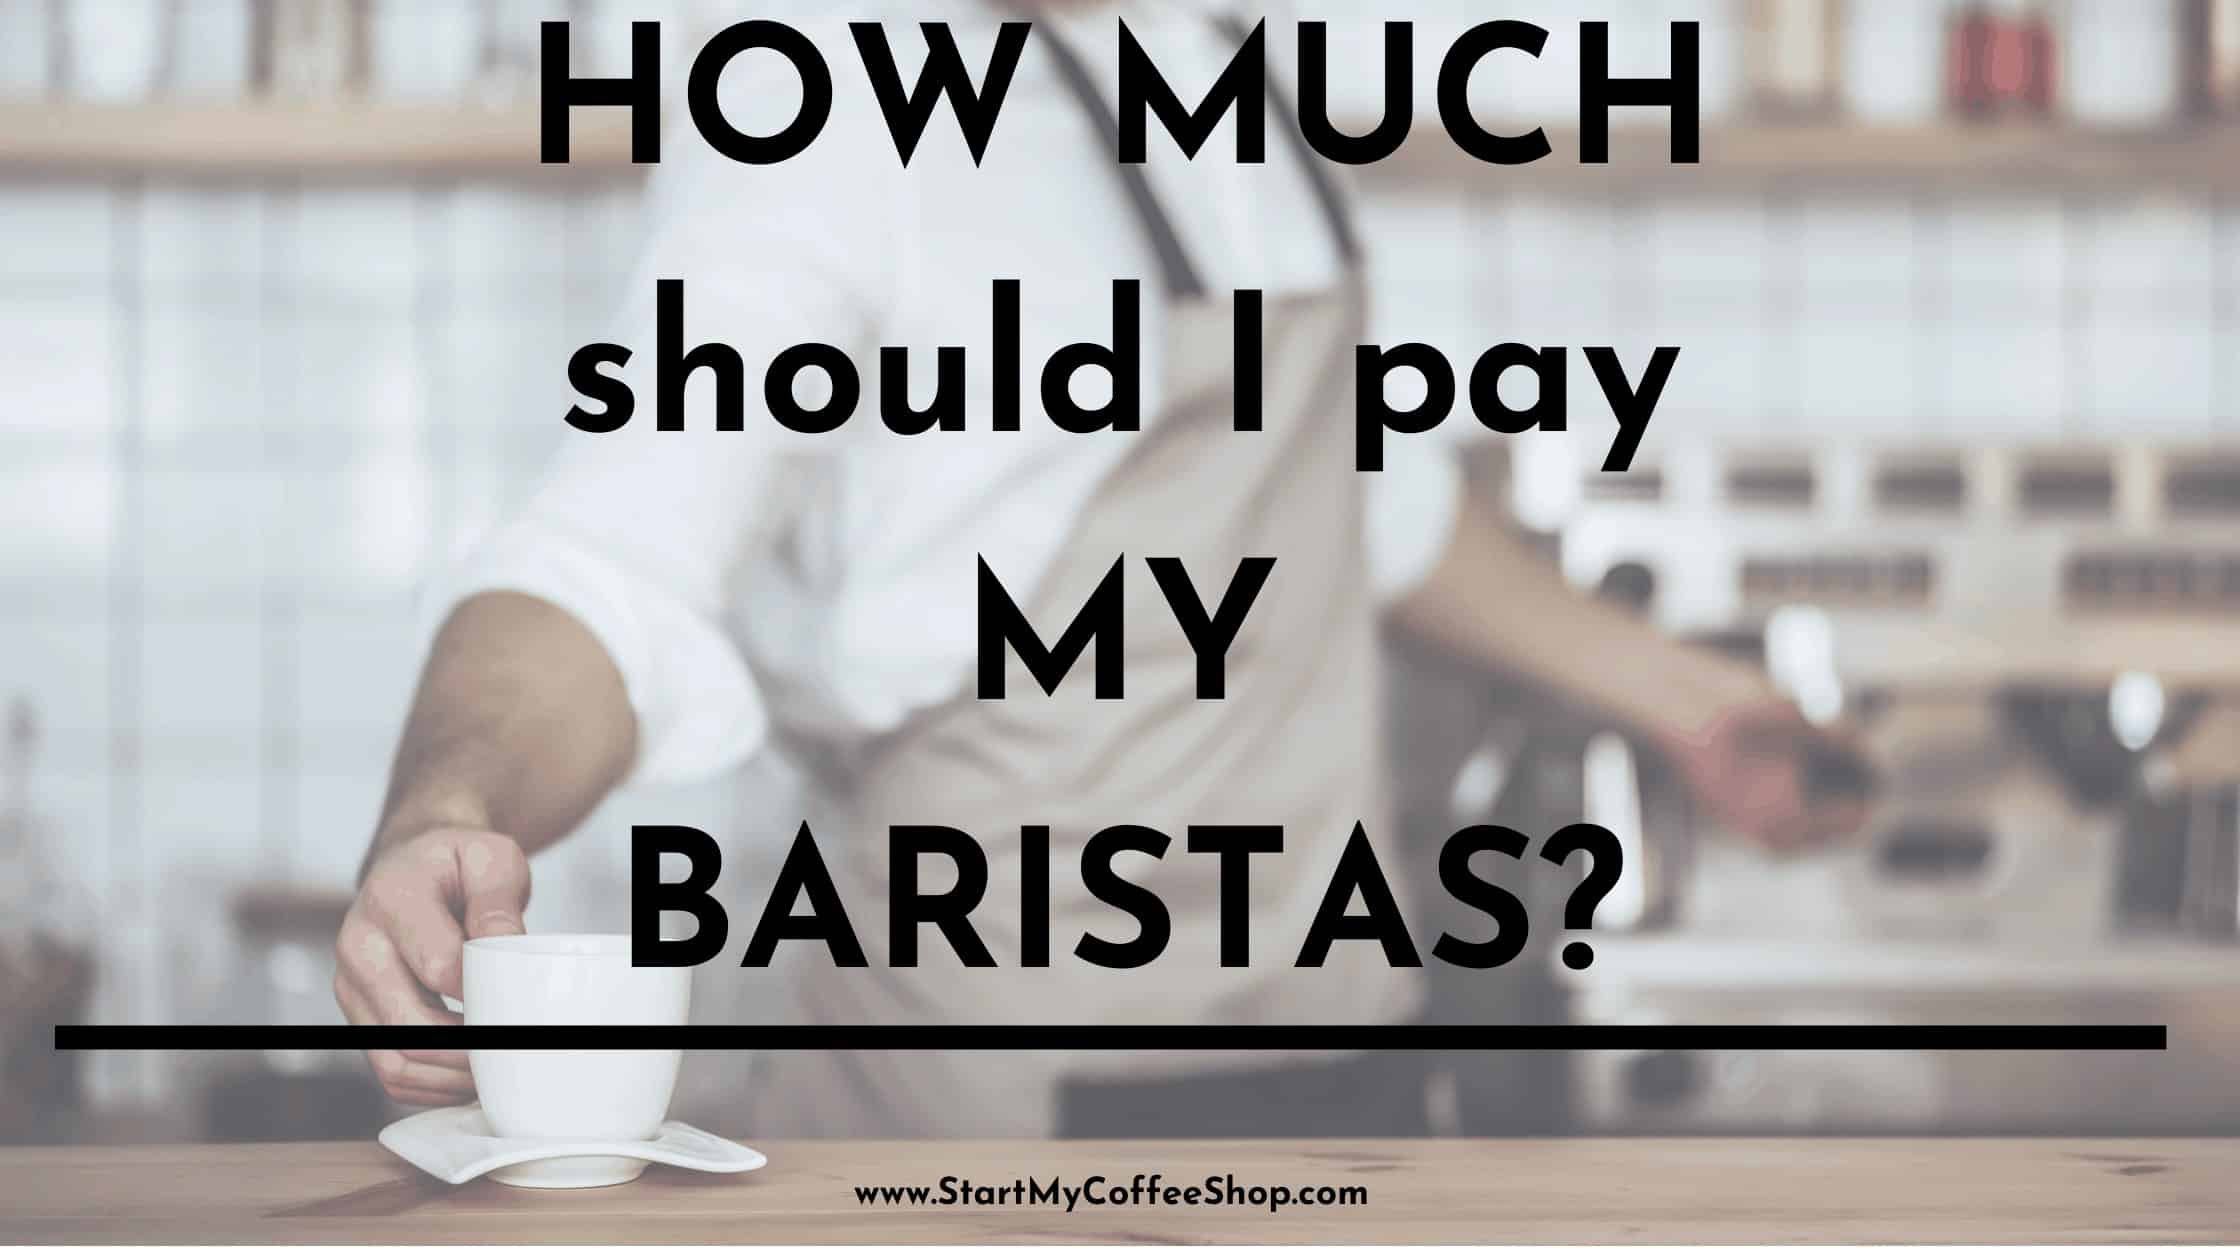 How much should I pay my baristas?